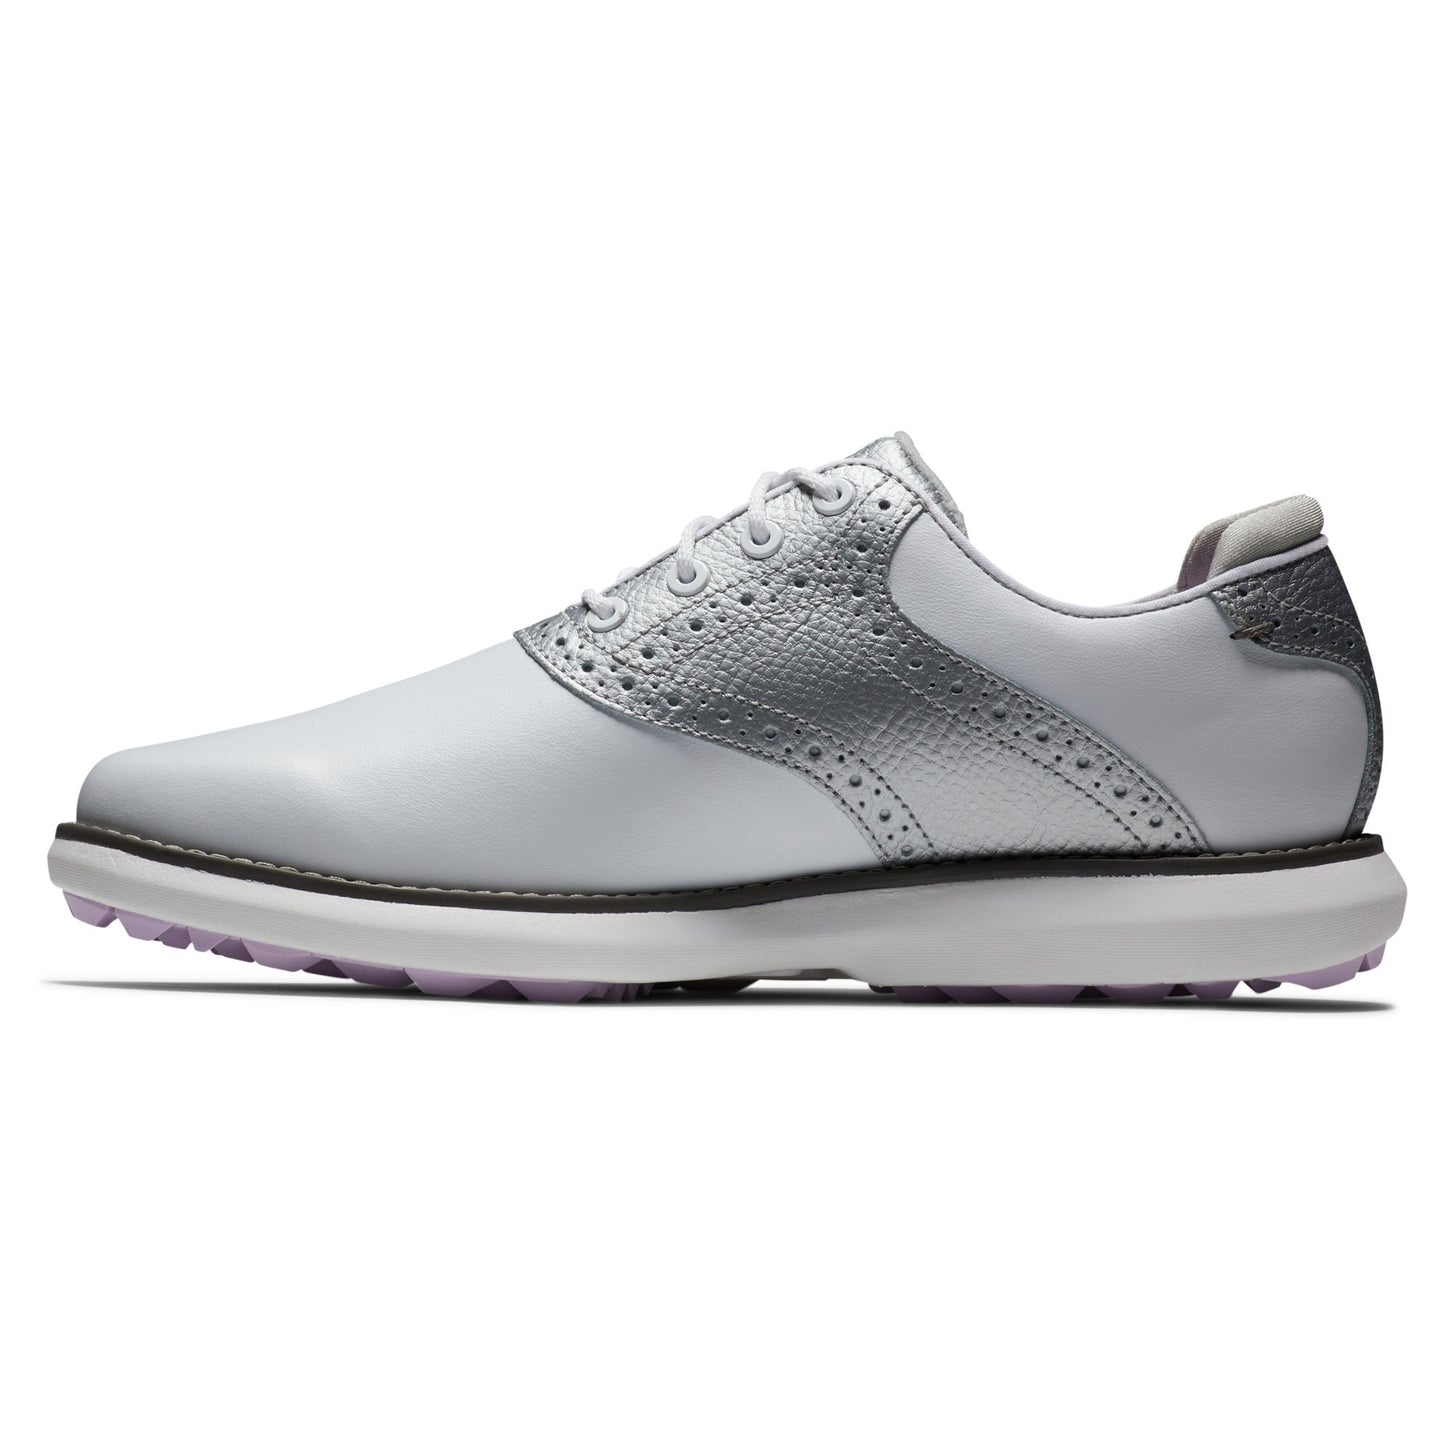 FootJoy Ladies Traditions Shoes in White, Silver & Purple